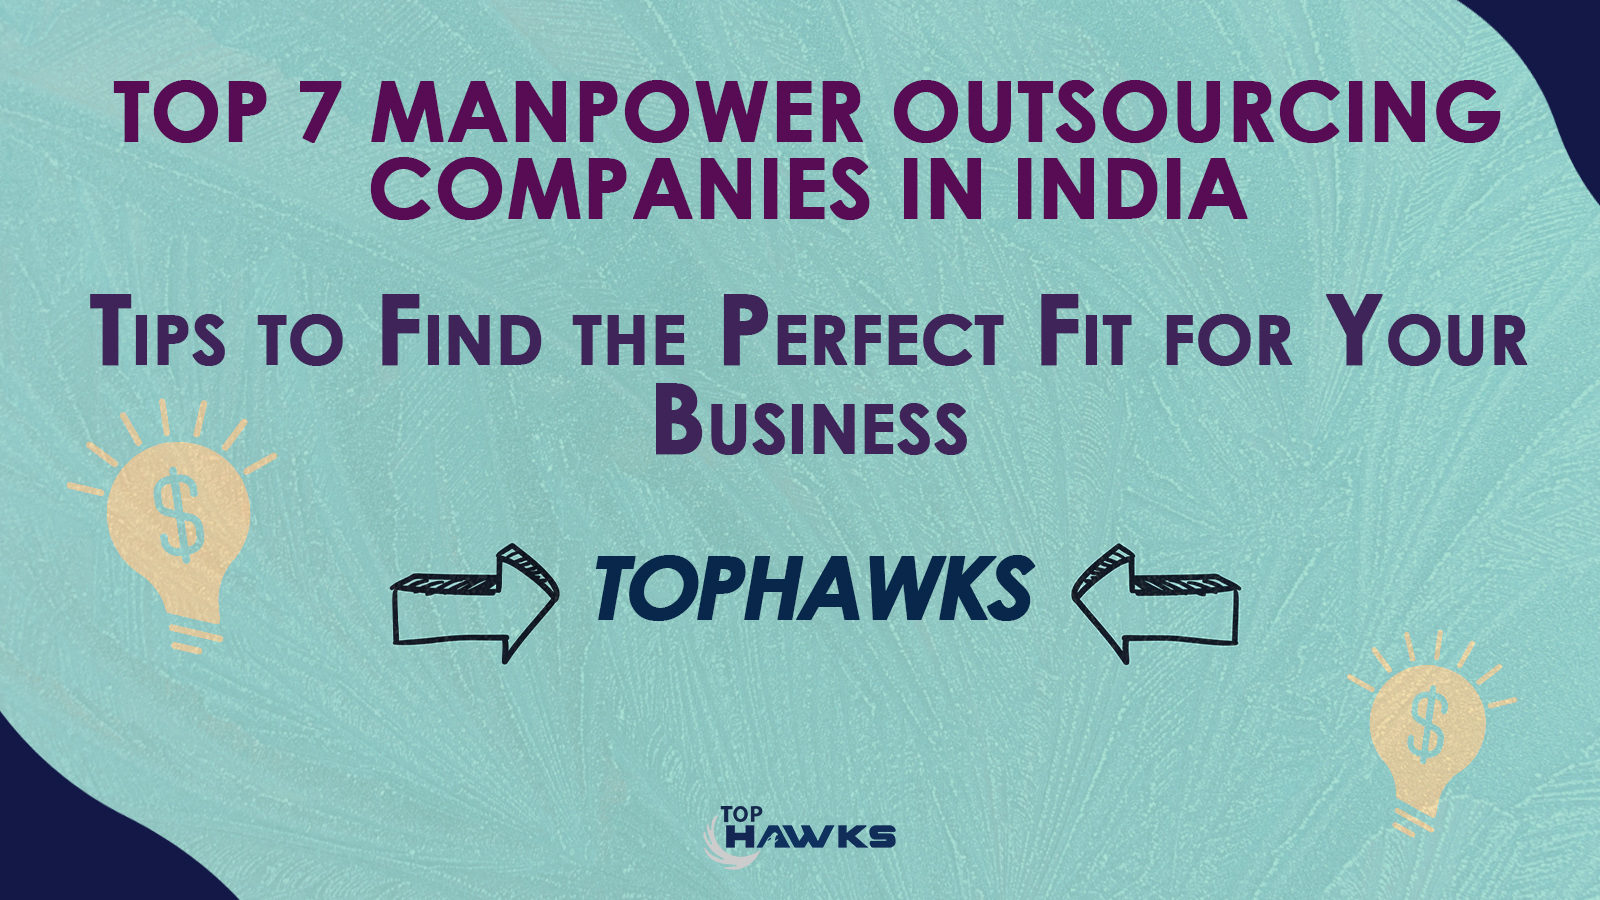 Image depicts the banner of top7 manpower outsourcing companies in india